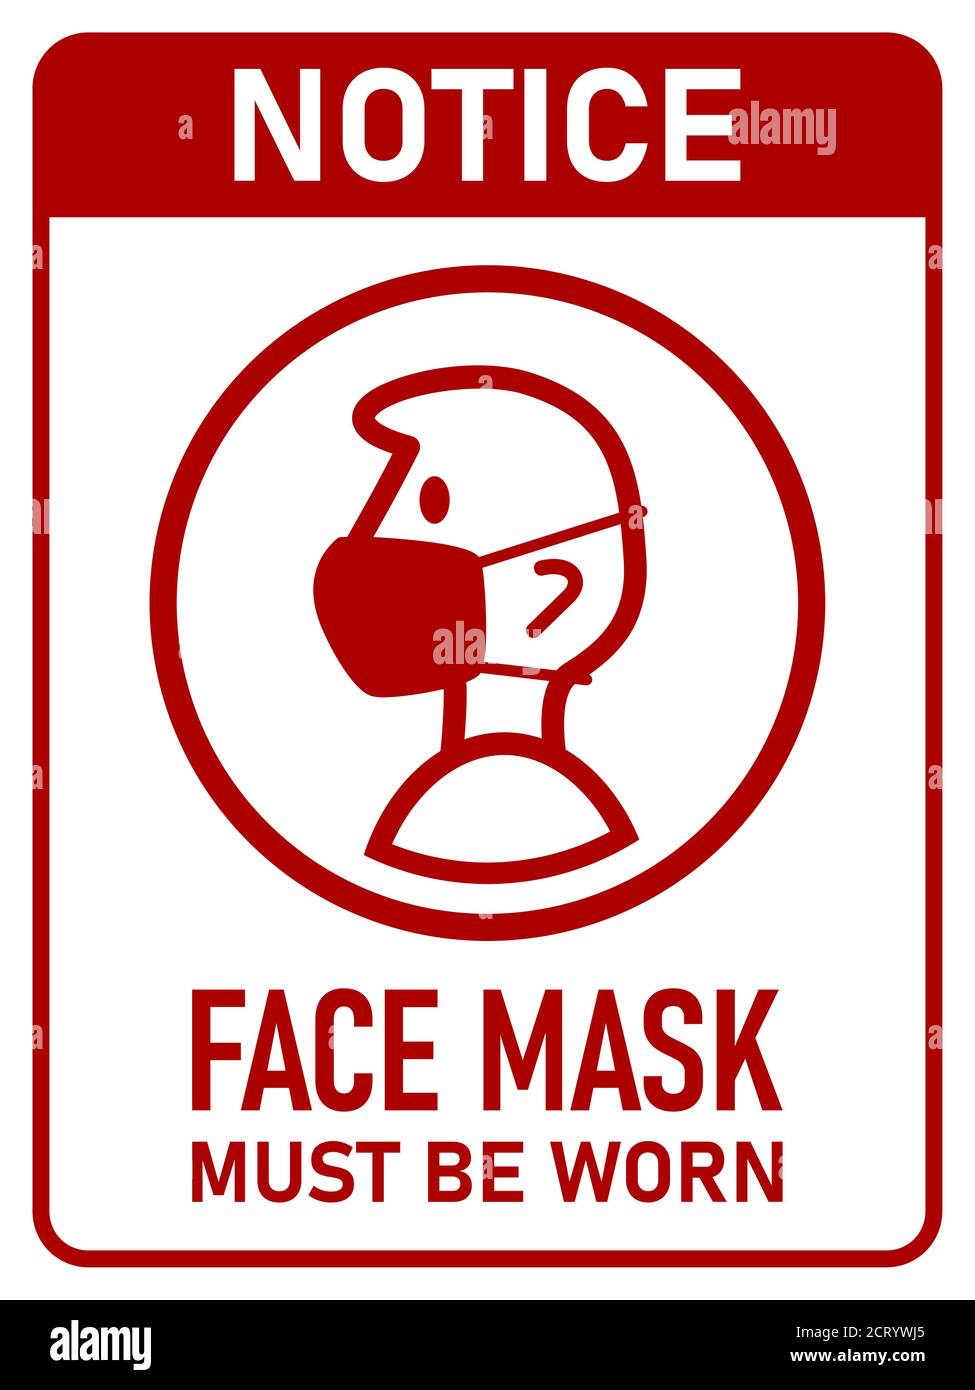 Notice Face Mask Must Be Worn Vertical Warning Poster Sign against the Spread of Coronavirus with an Aspect Ratio of 3:4. Vector Image. Stock Vector